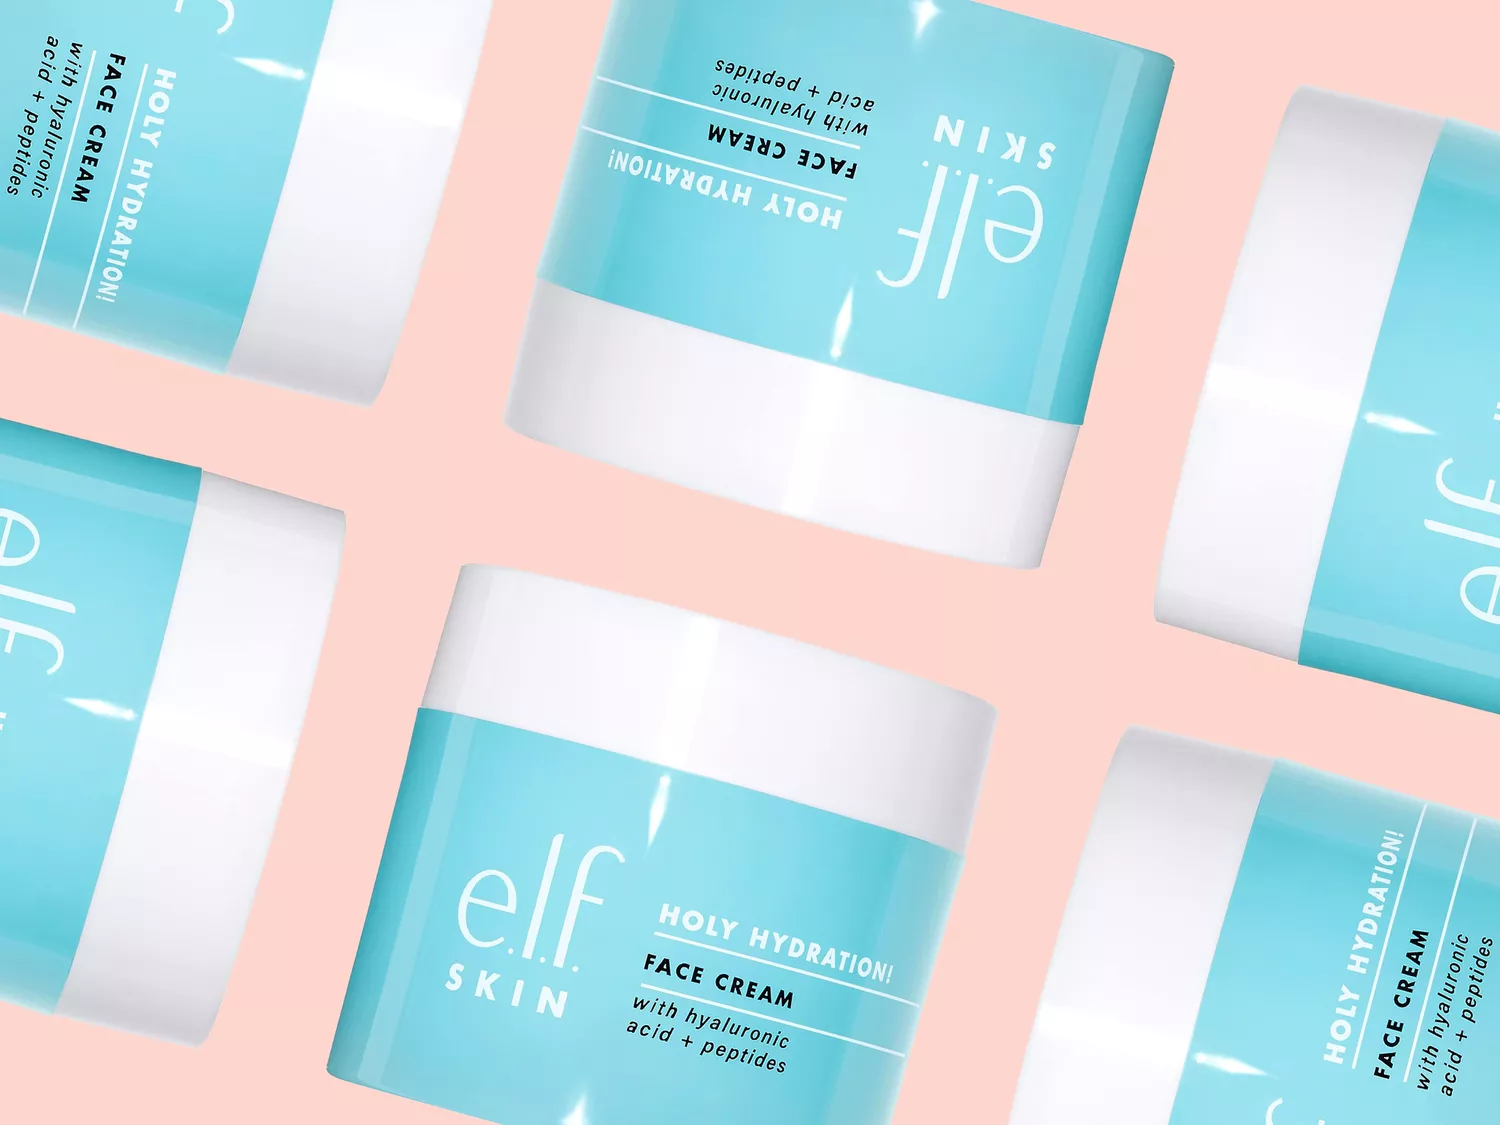 Shoppers Wake Up to “Plump, Hydrated, Glowing Skin” Thanks to This $13 Moisturizer